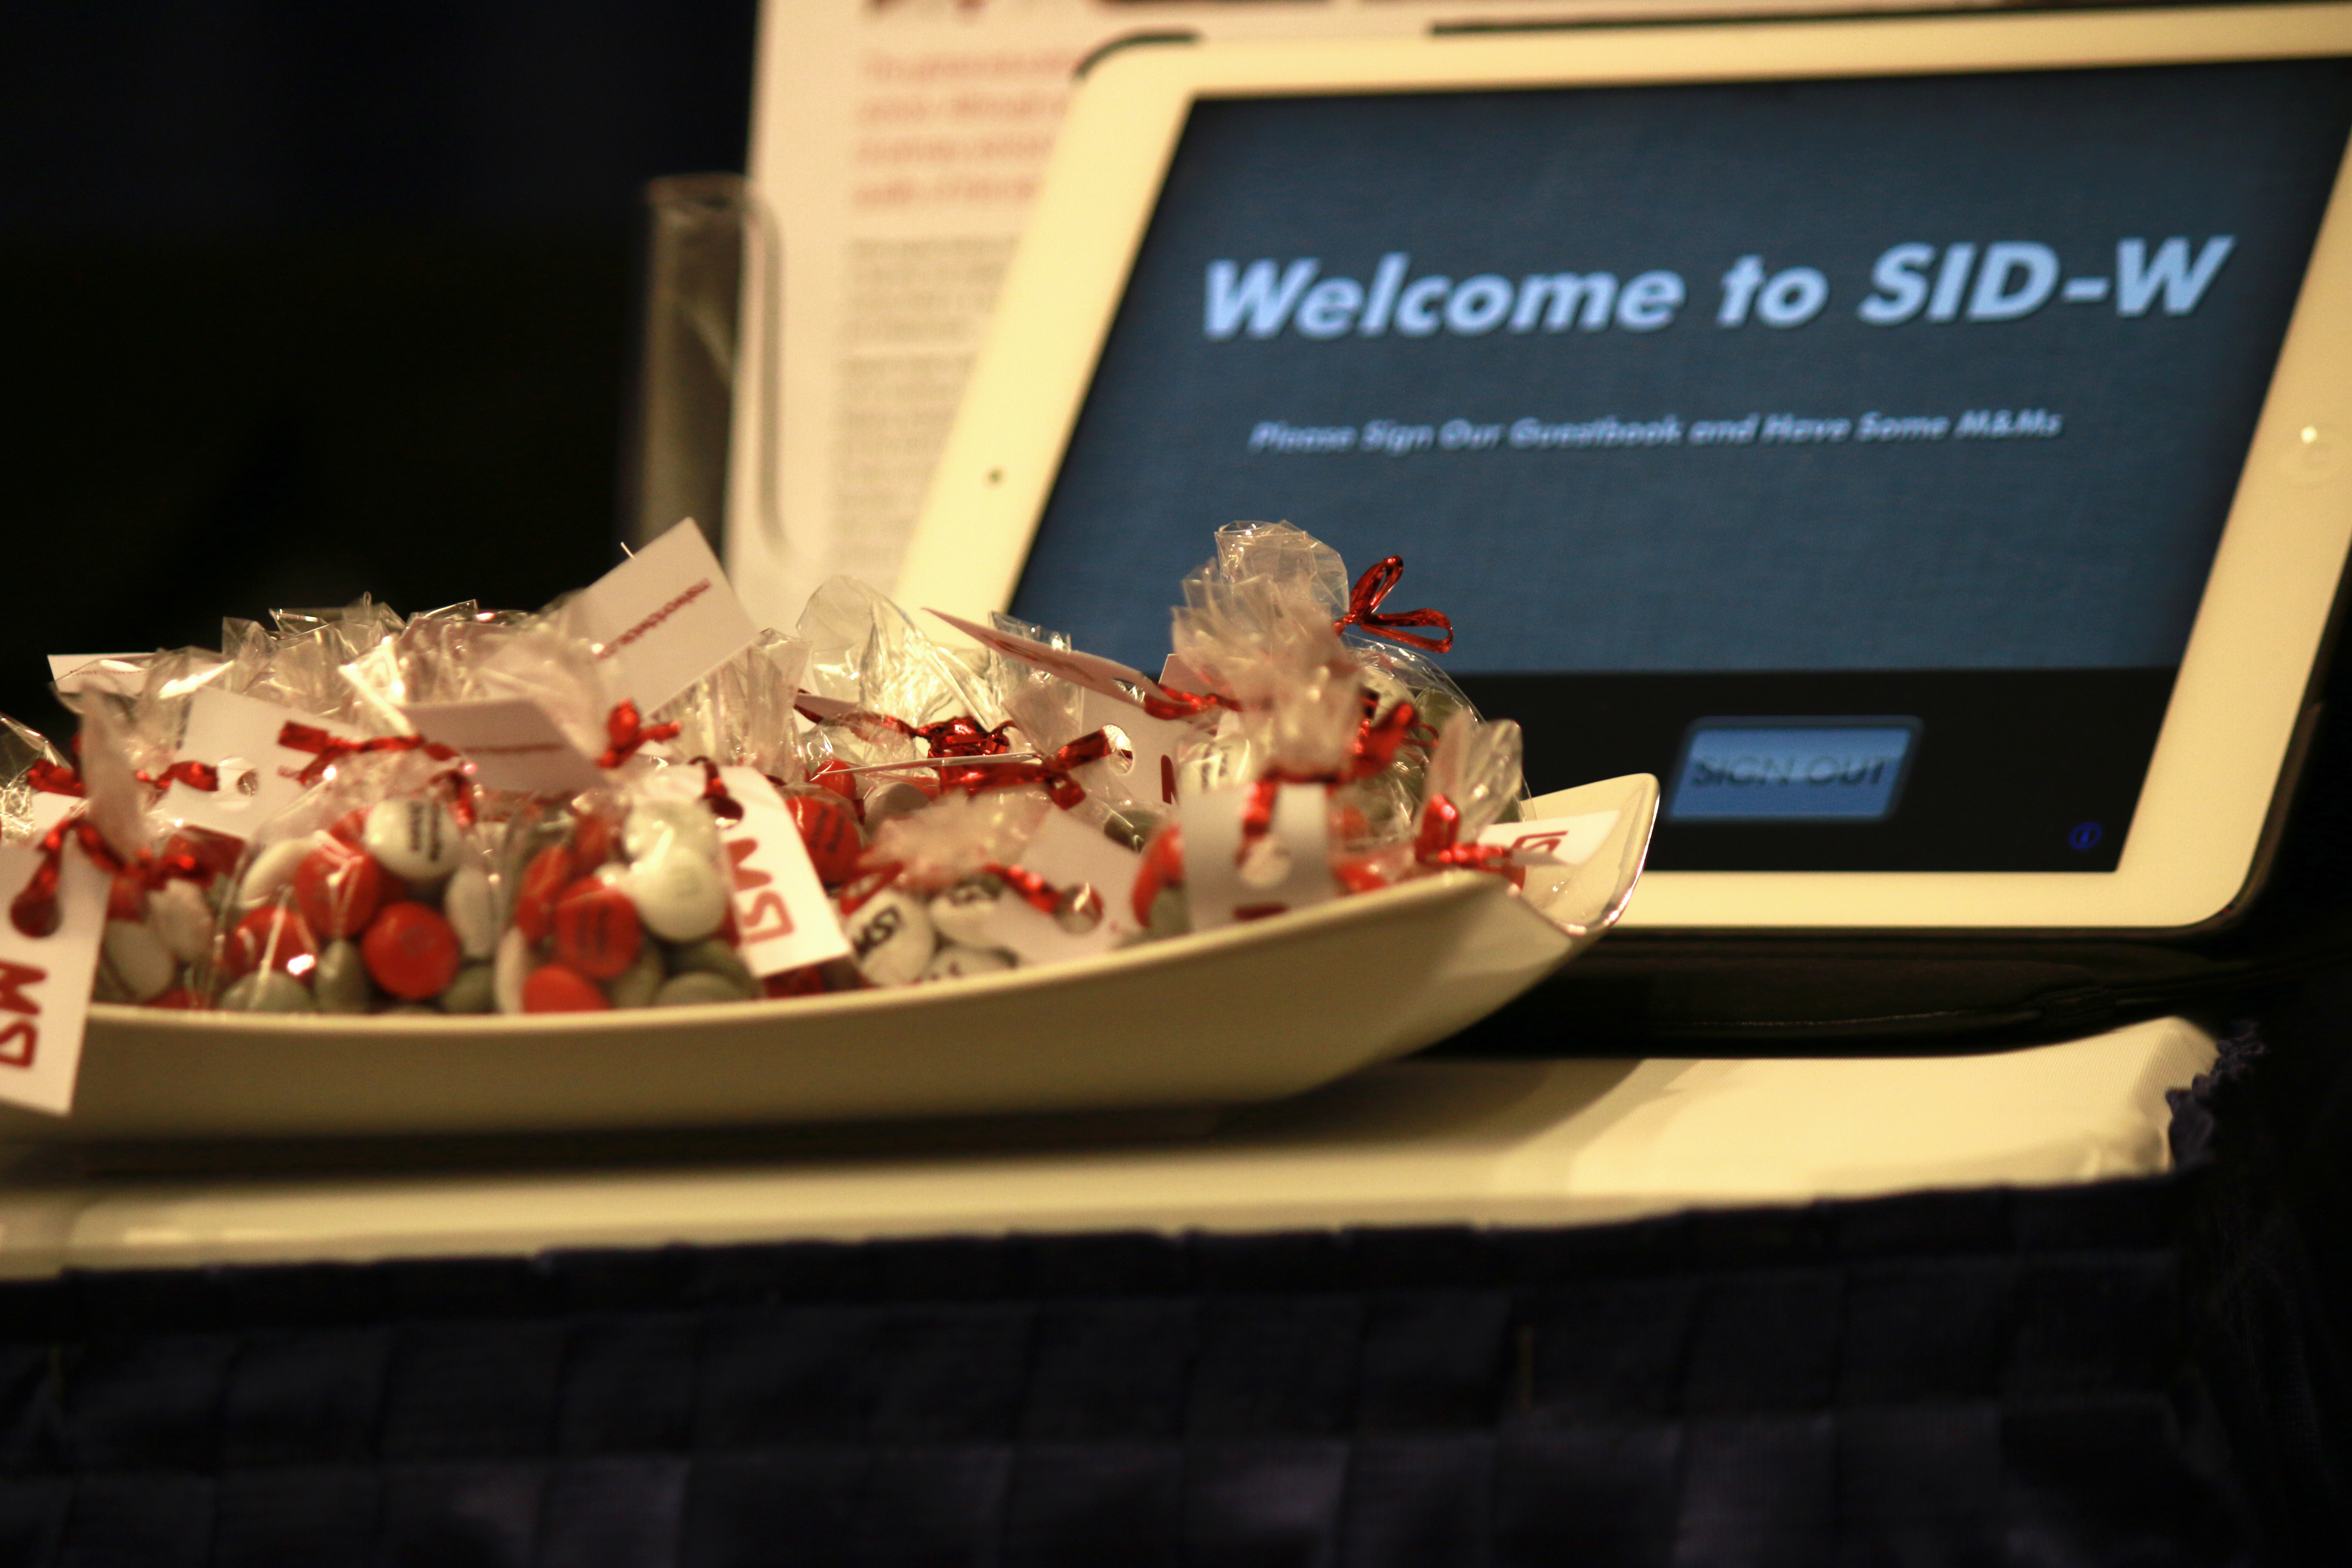 Bowl of MSI-branded M&M candies sits in front of iPad that reads "Welcome to SID-W"